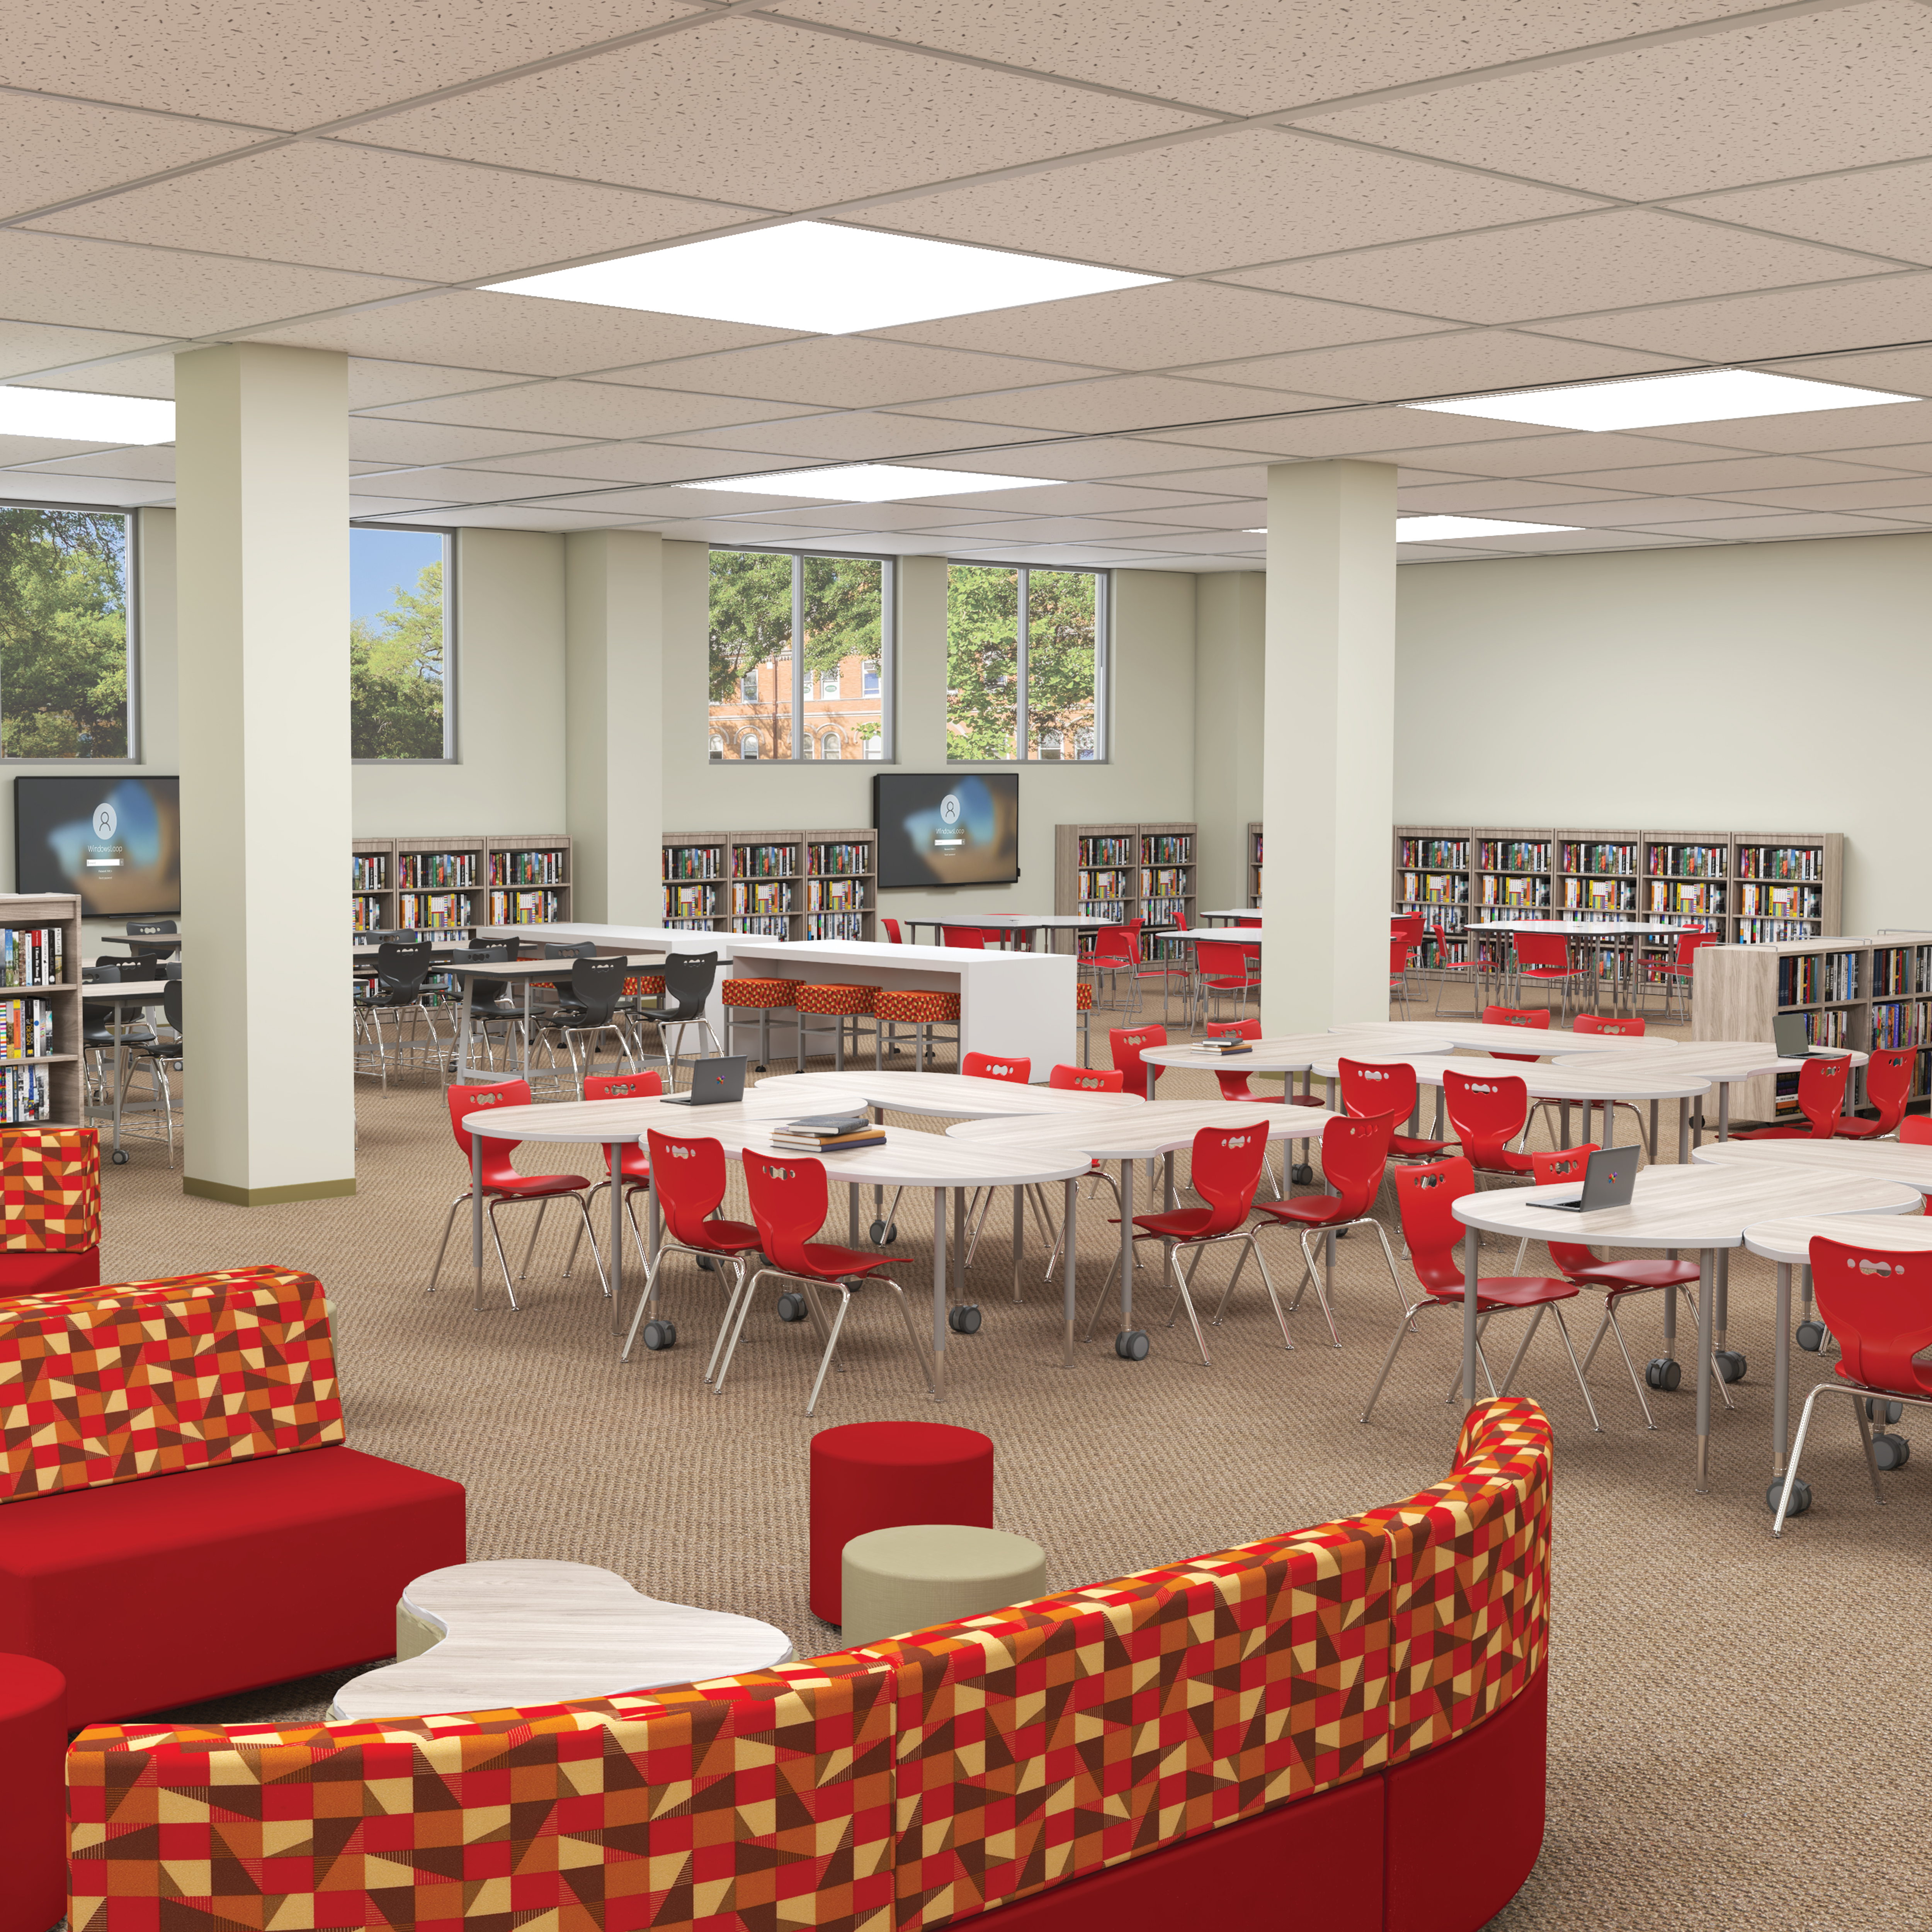 Meet the Developmental Needs of Students in a Middle School Media Center